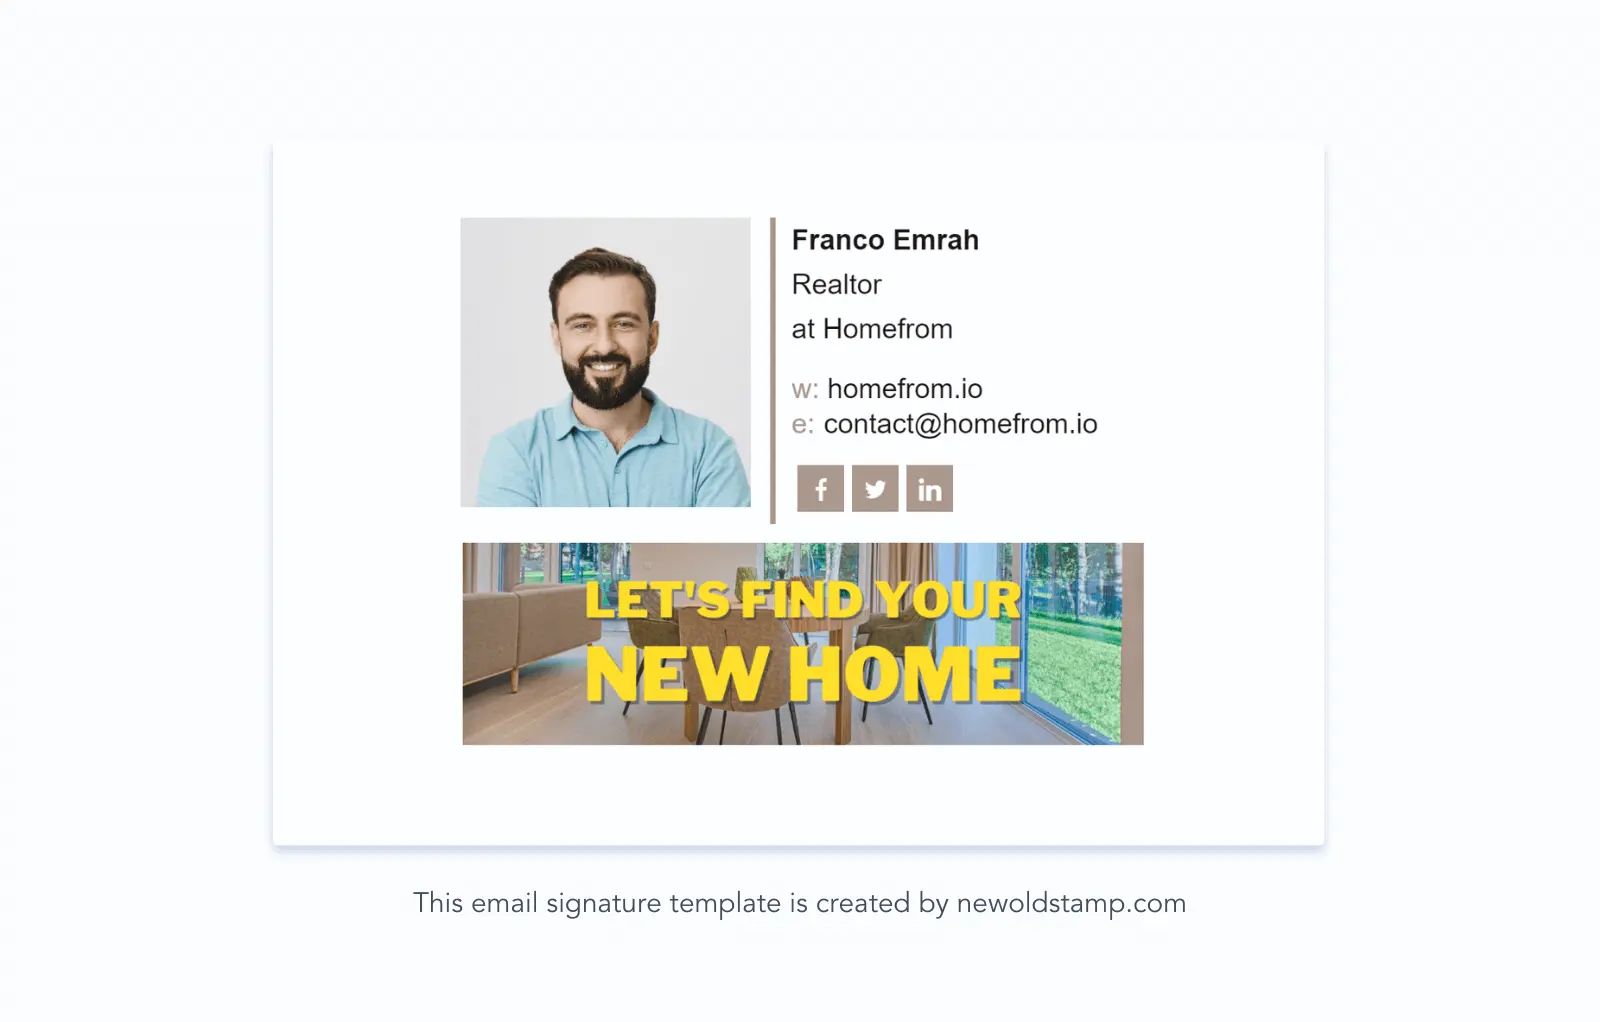 Example of a professional email signature for realtors